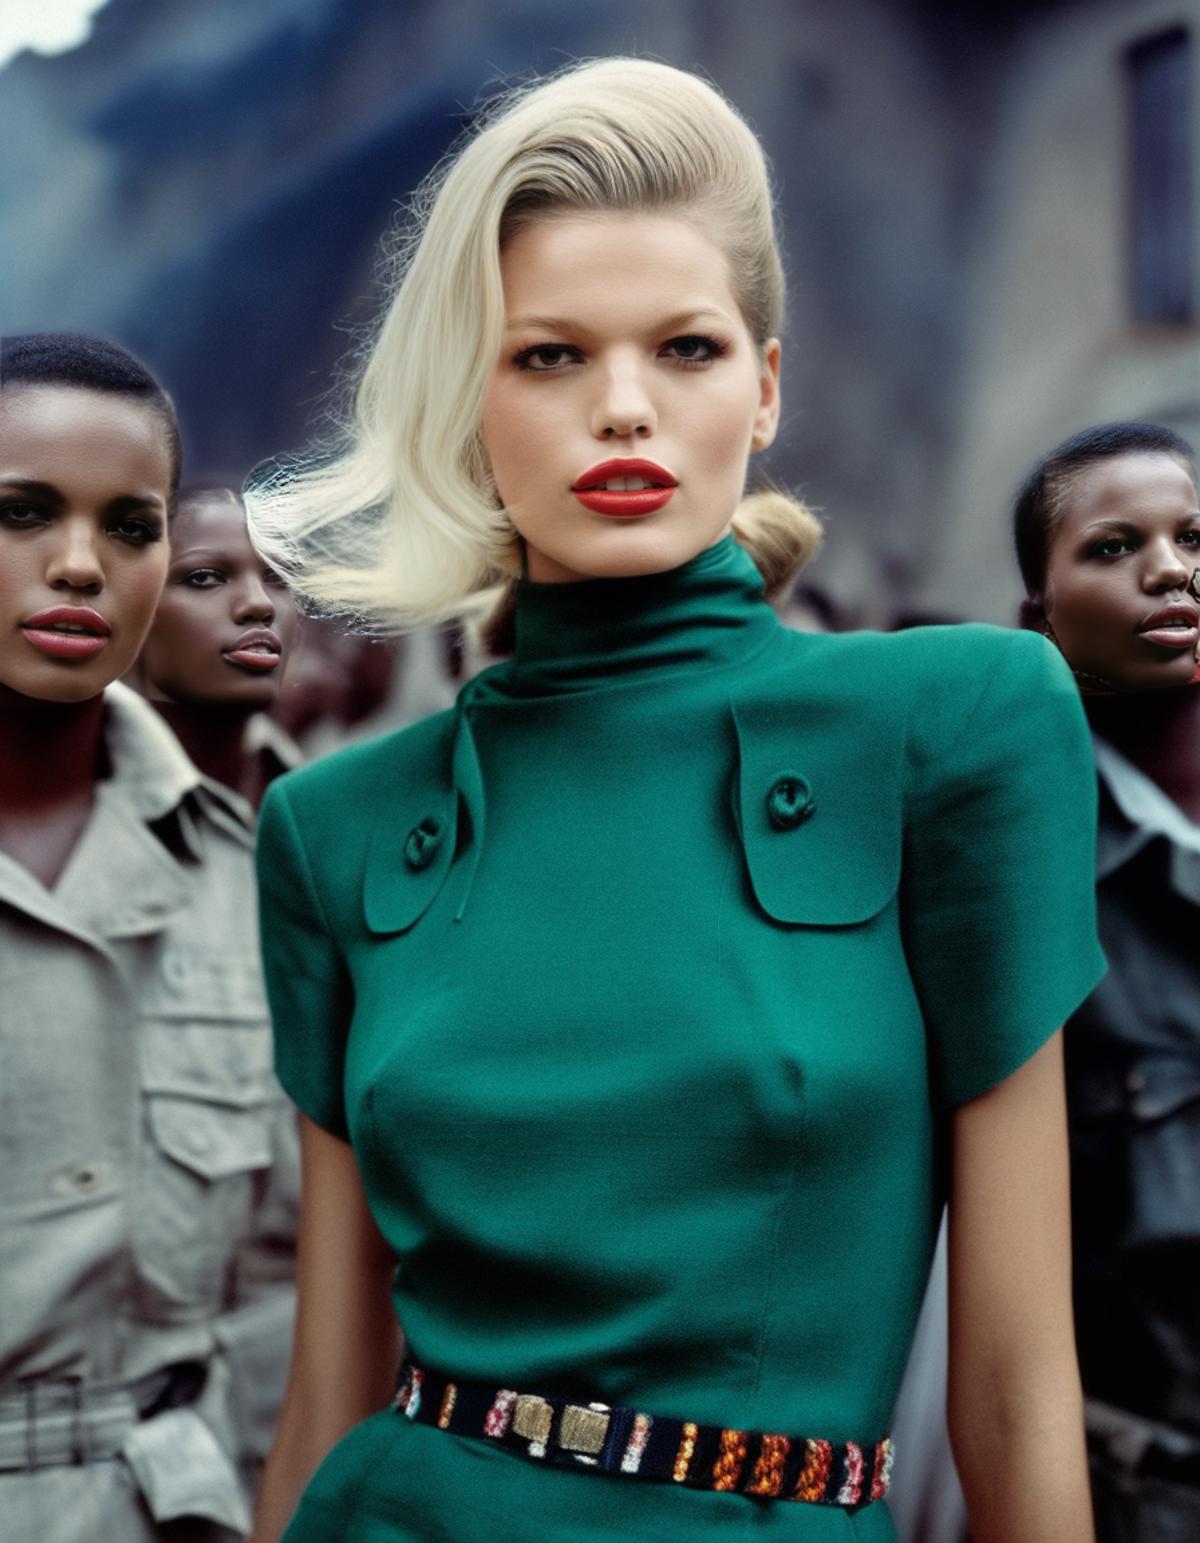 Daphne Groeneveld image by Bytor1966